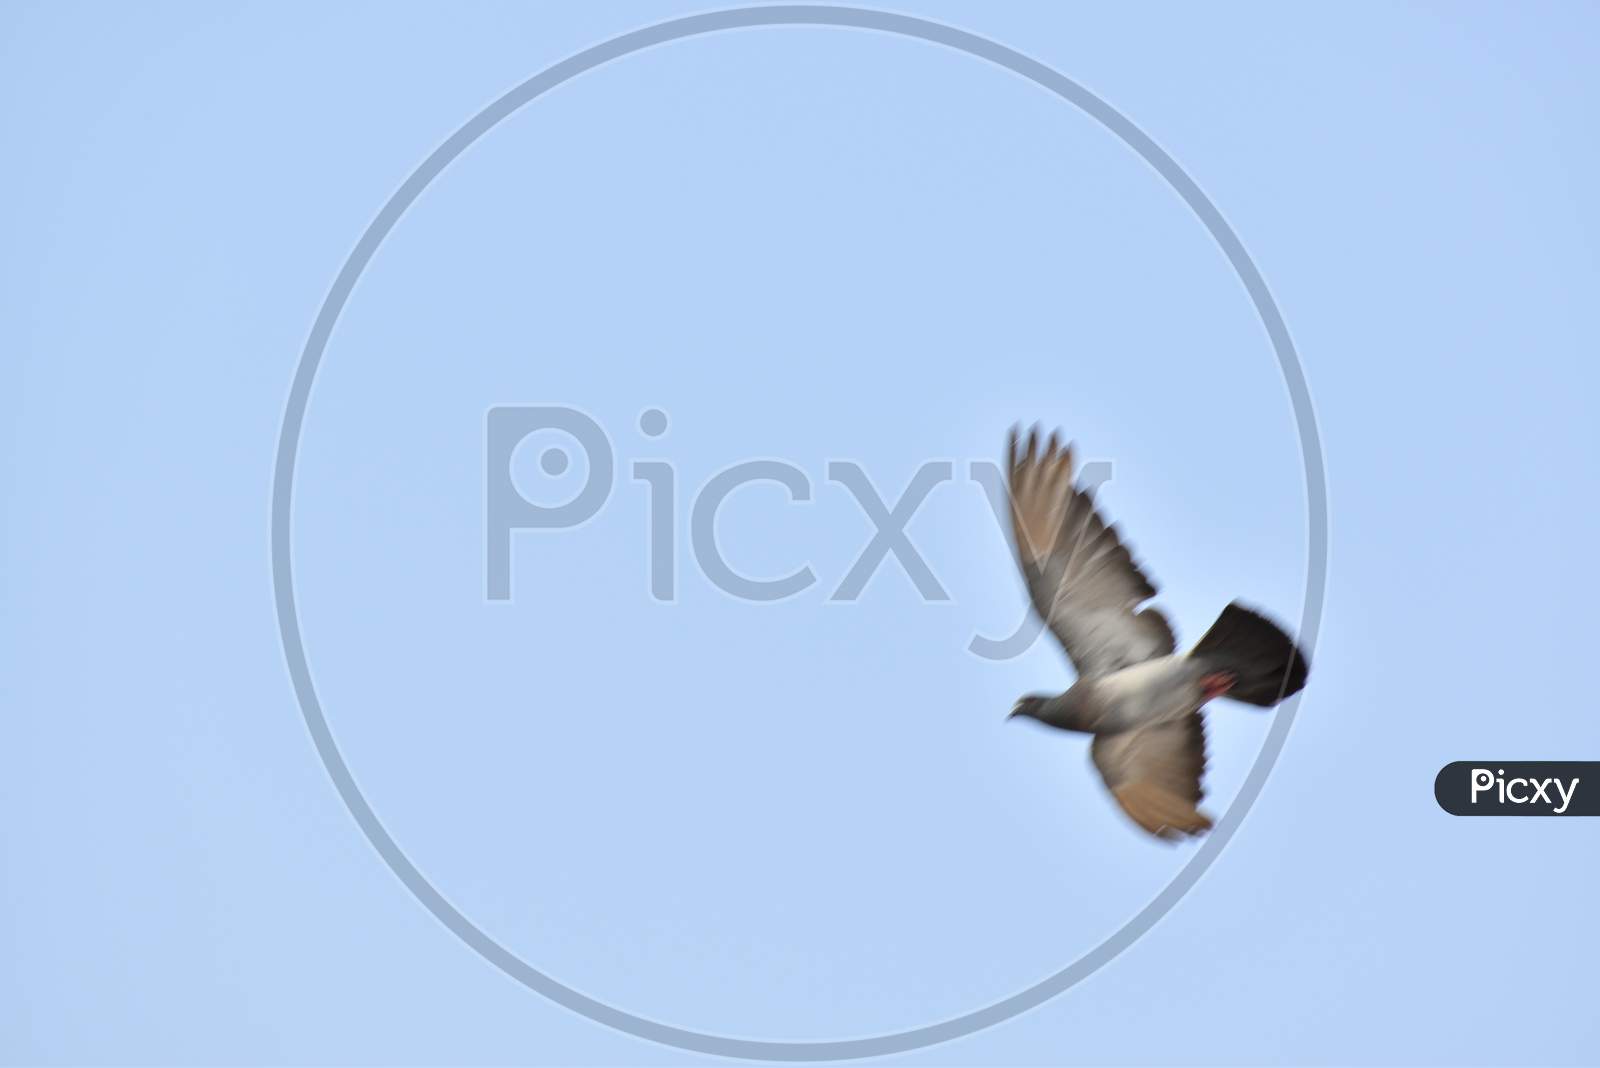 Feather Wing Of Homing Pigeon Bird Floating Mid Air Blue Sky.